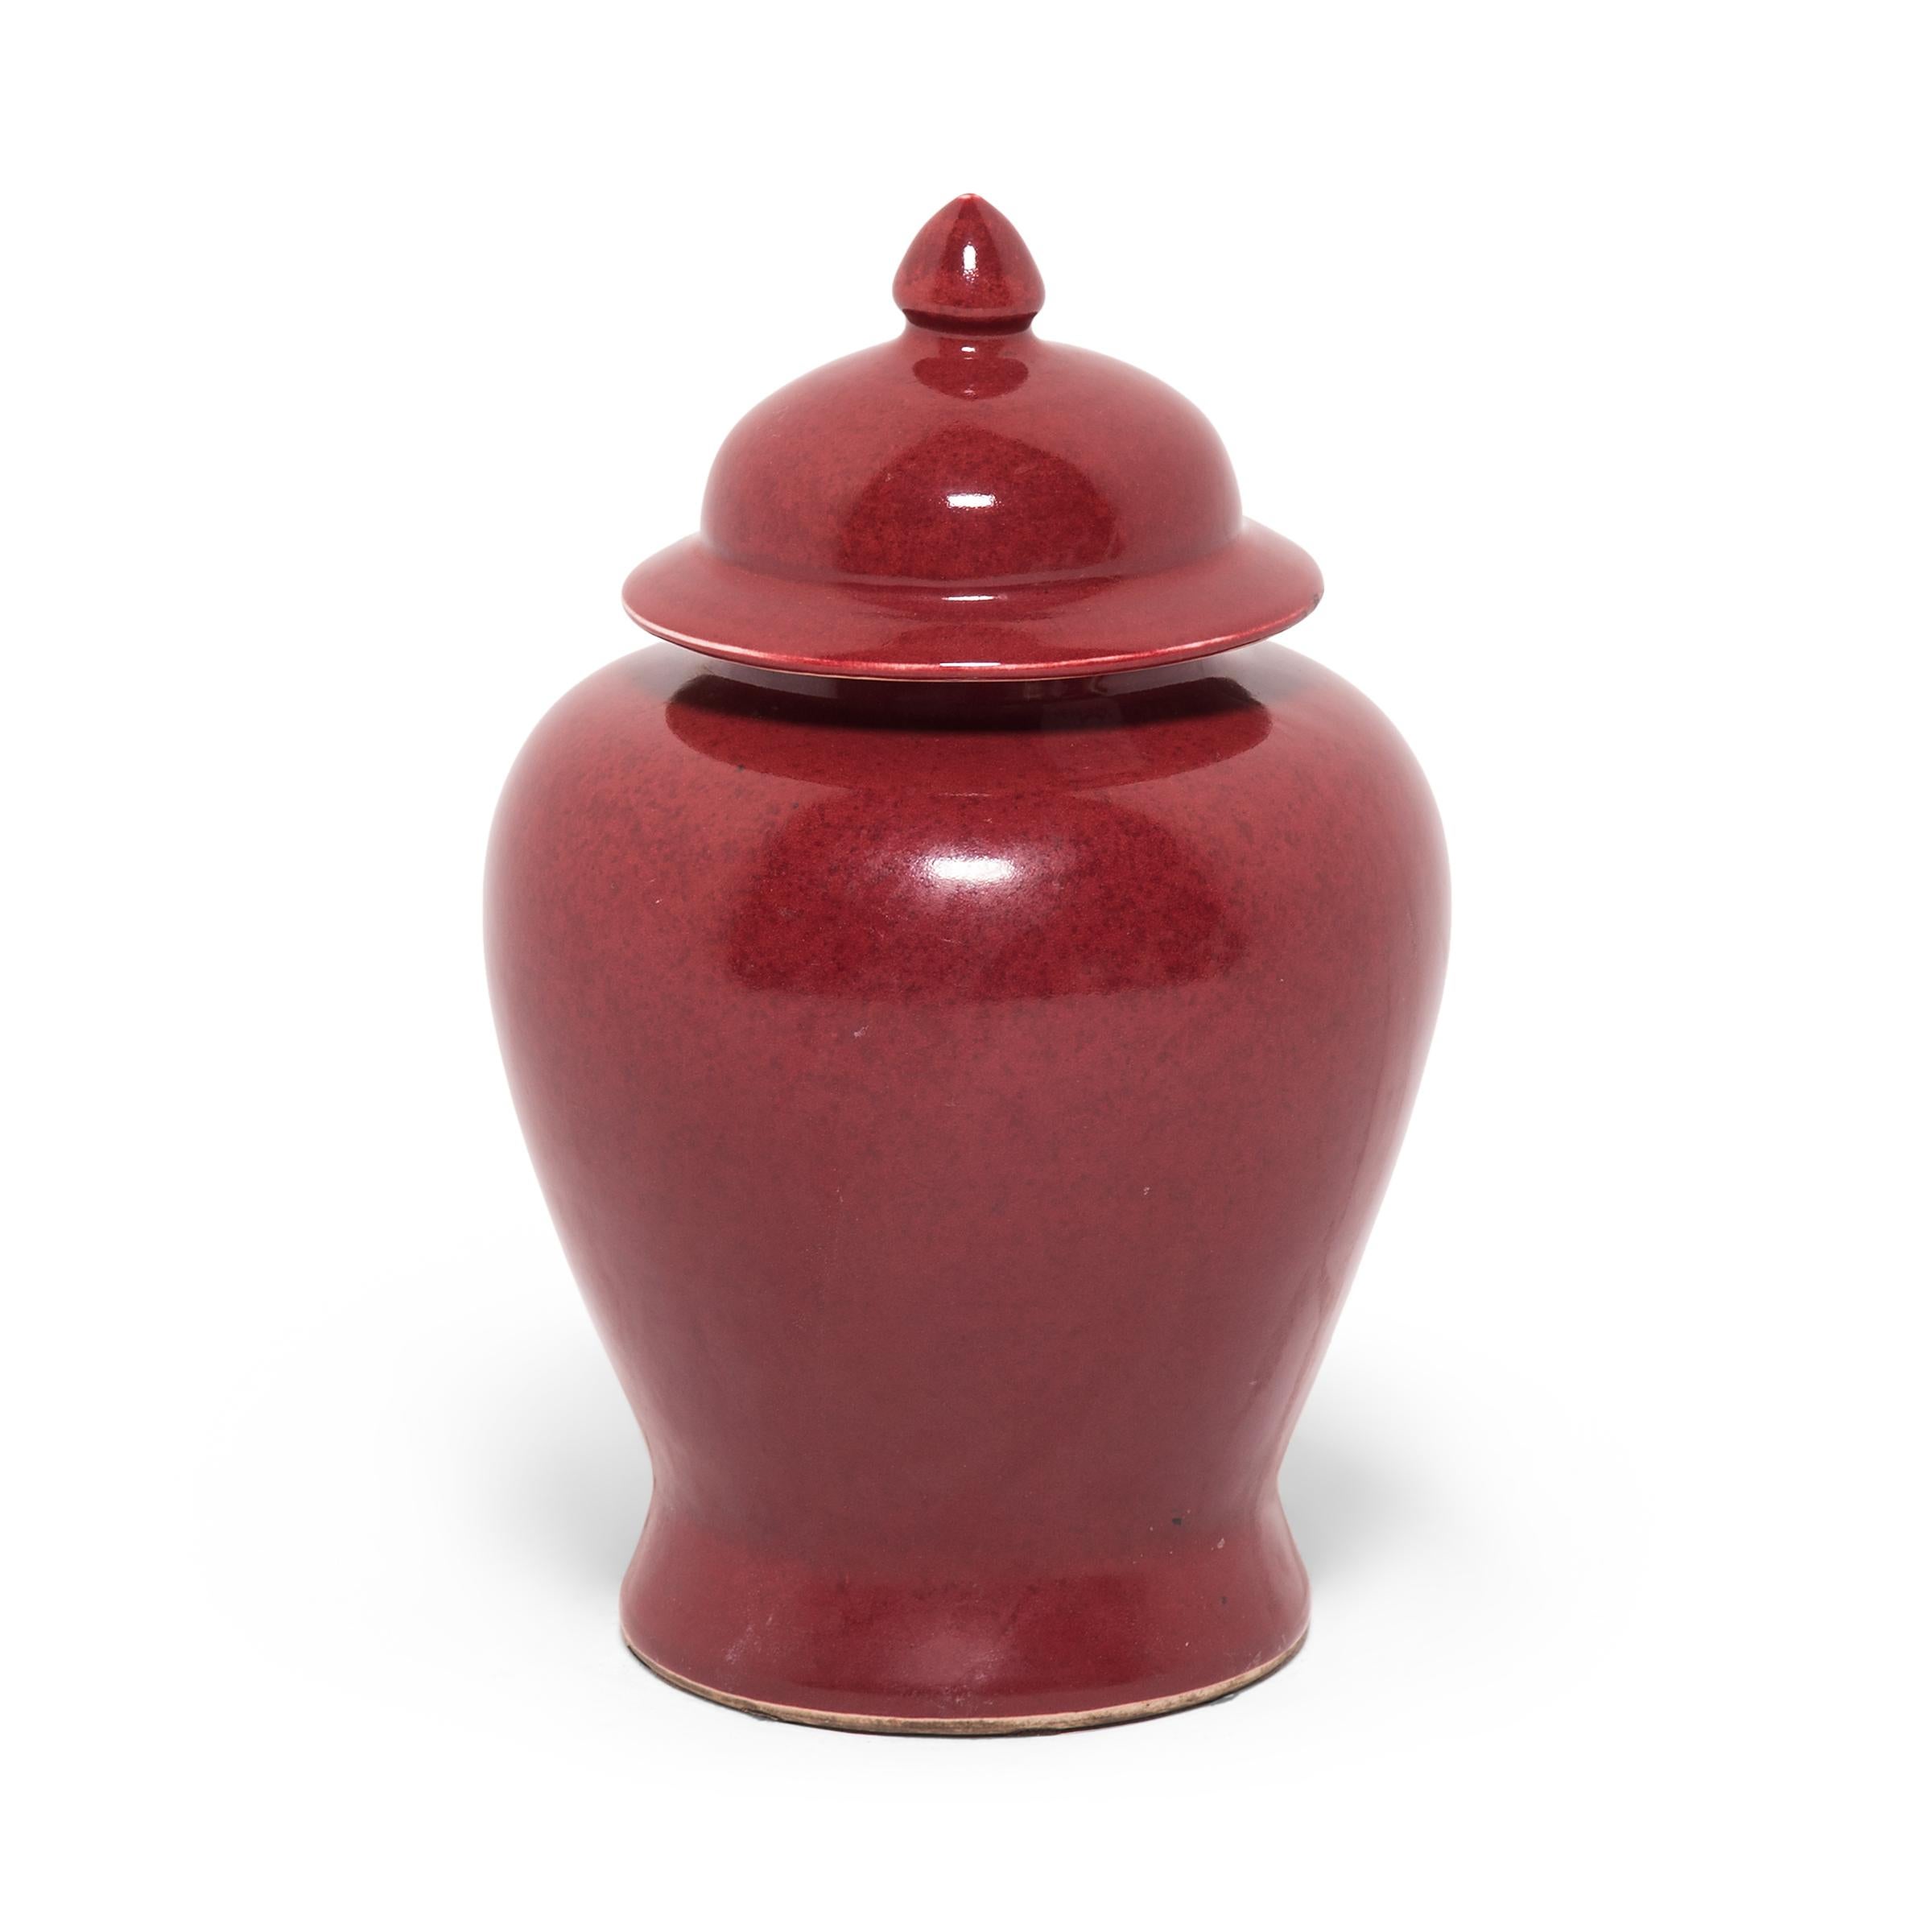 This contemporary take on the traditional ginger form emphasizes its rich color and elegant shape - characterized by its rounded body, high shoulders, and domed lid. The vase's deep, rich red glaze is often called 